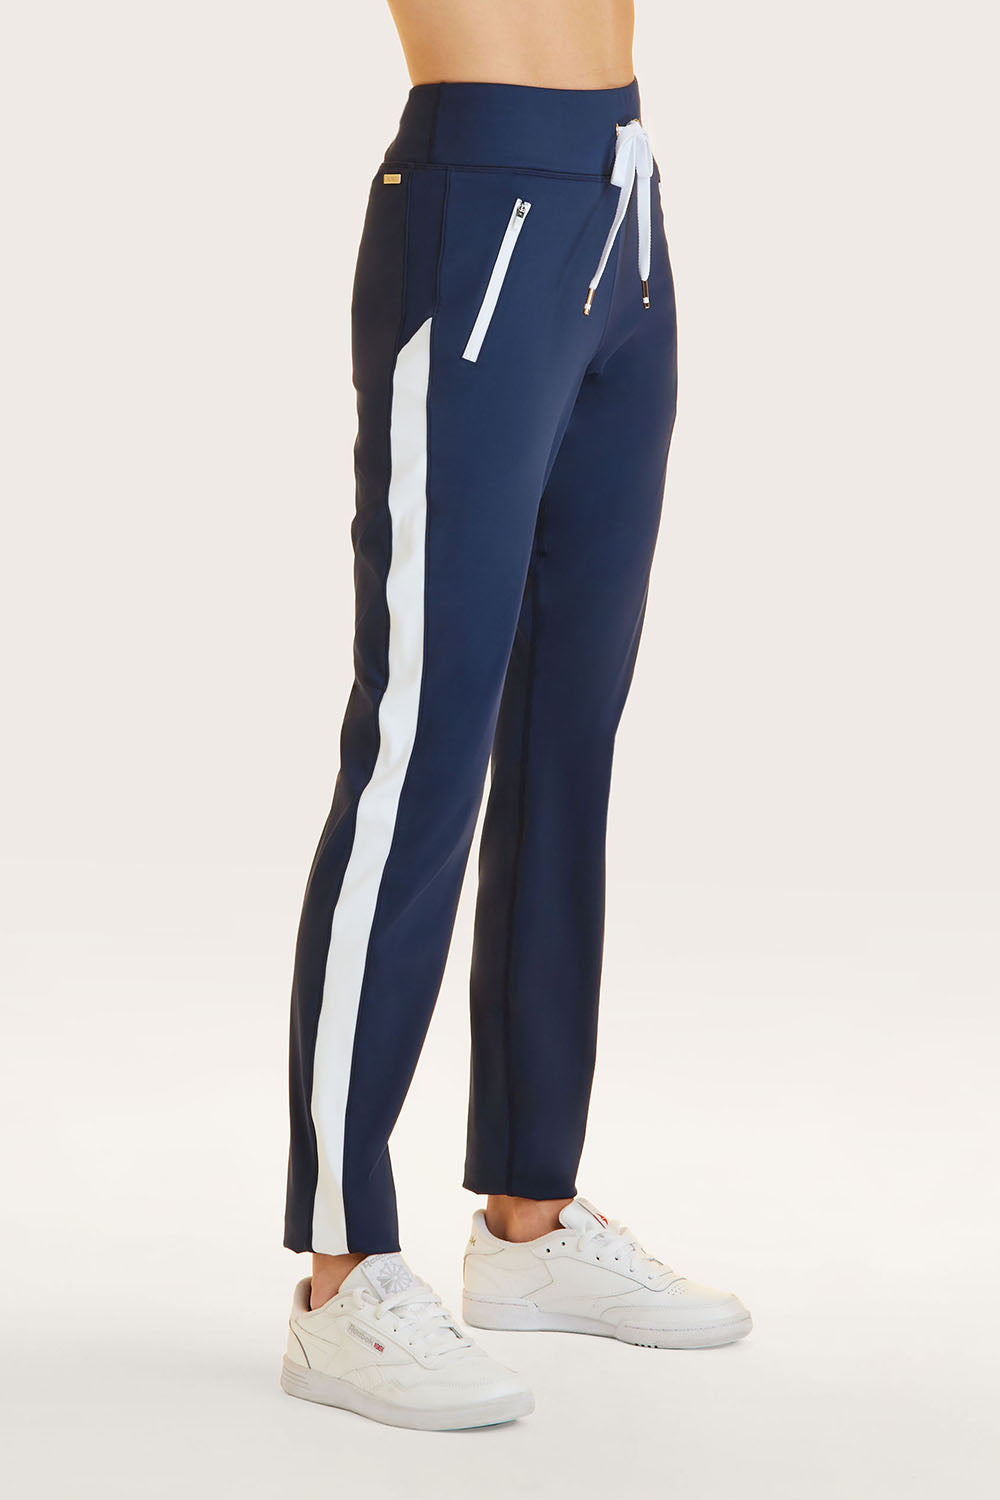 Alala women's active pant in navy with white stripe